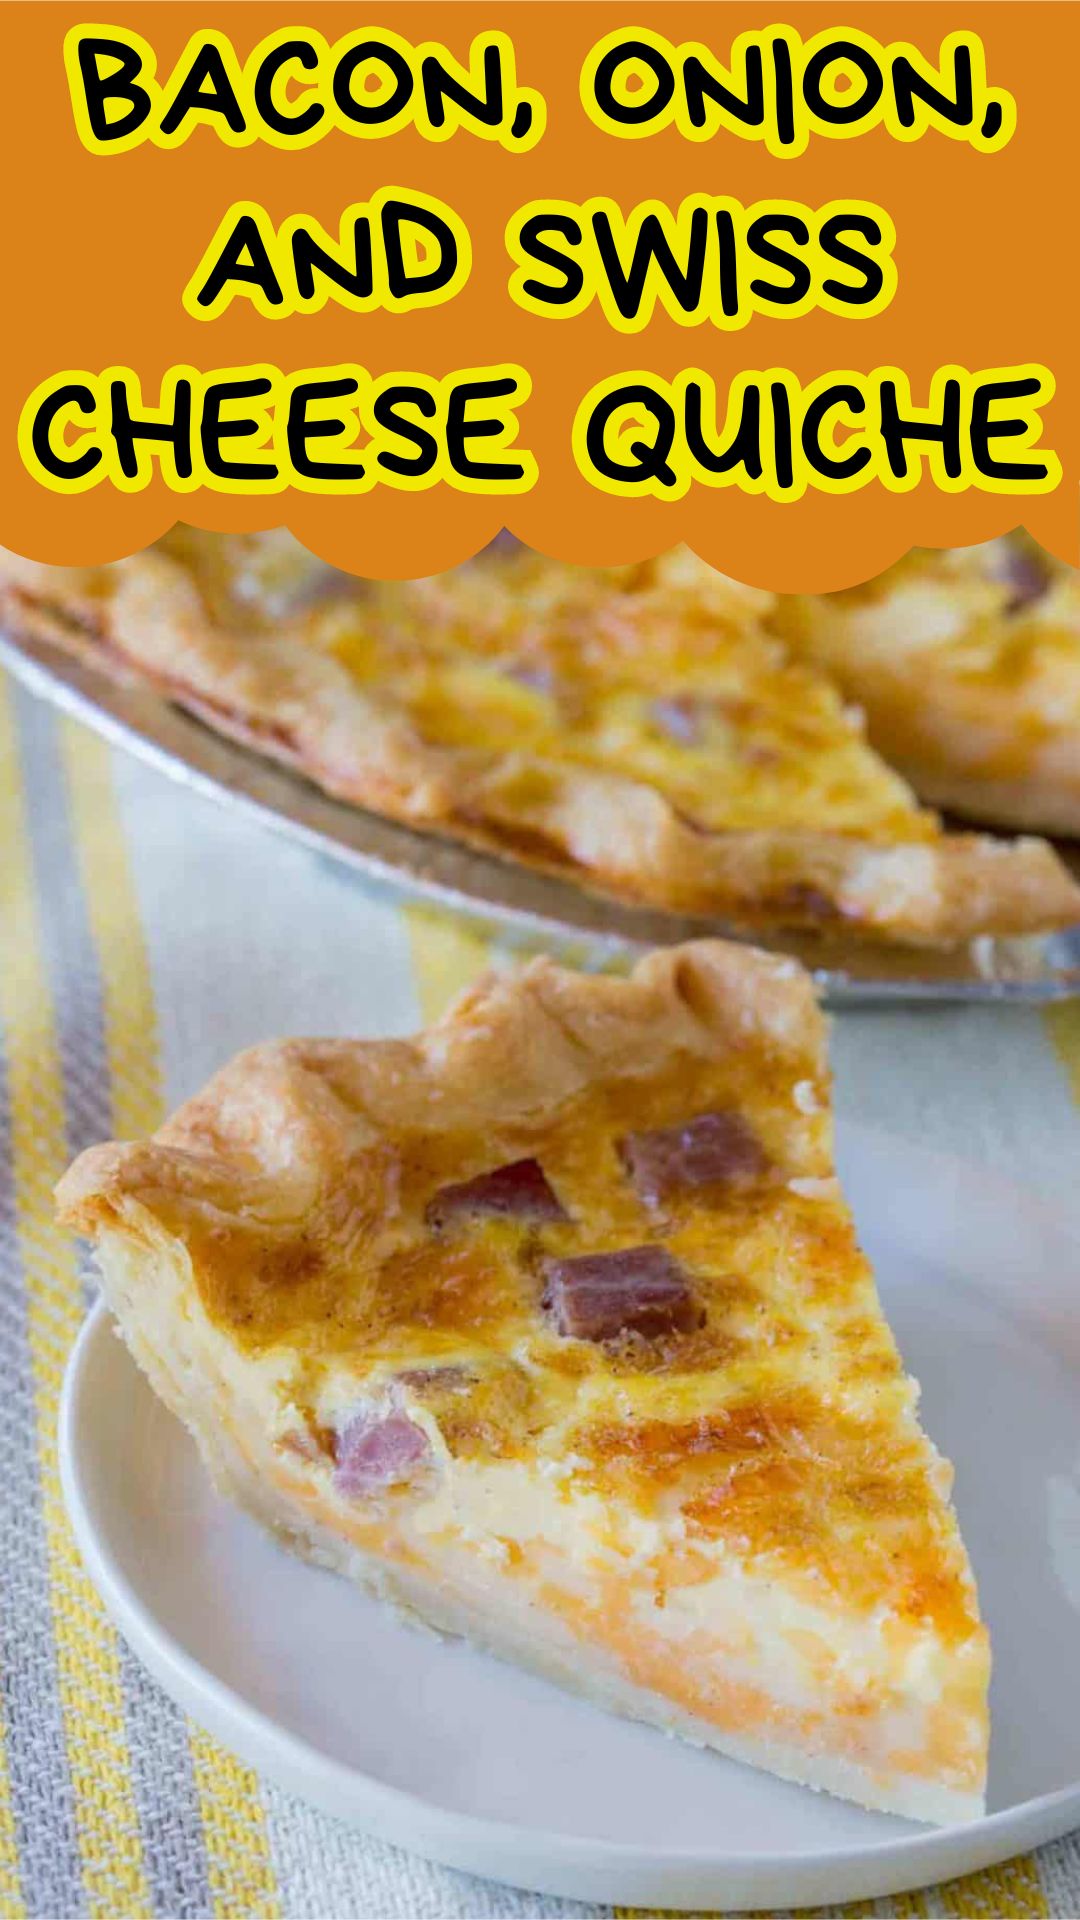 Bacon, Onion, and Swiss Cheese Quiche